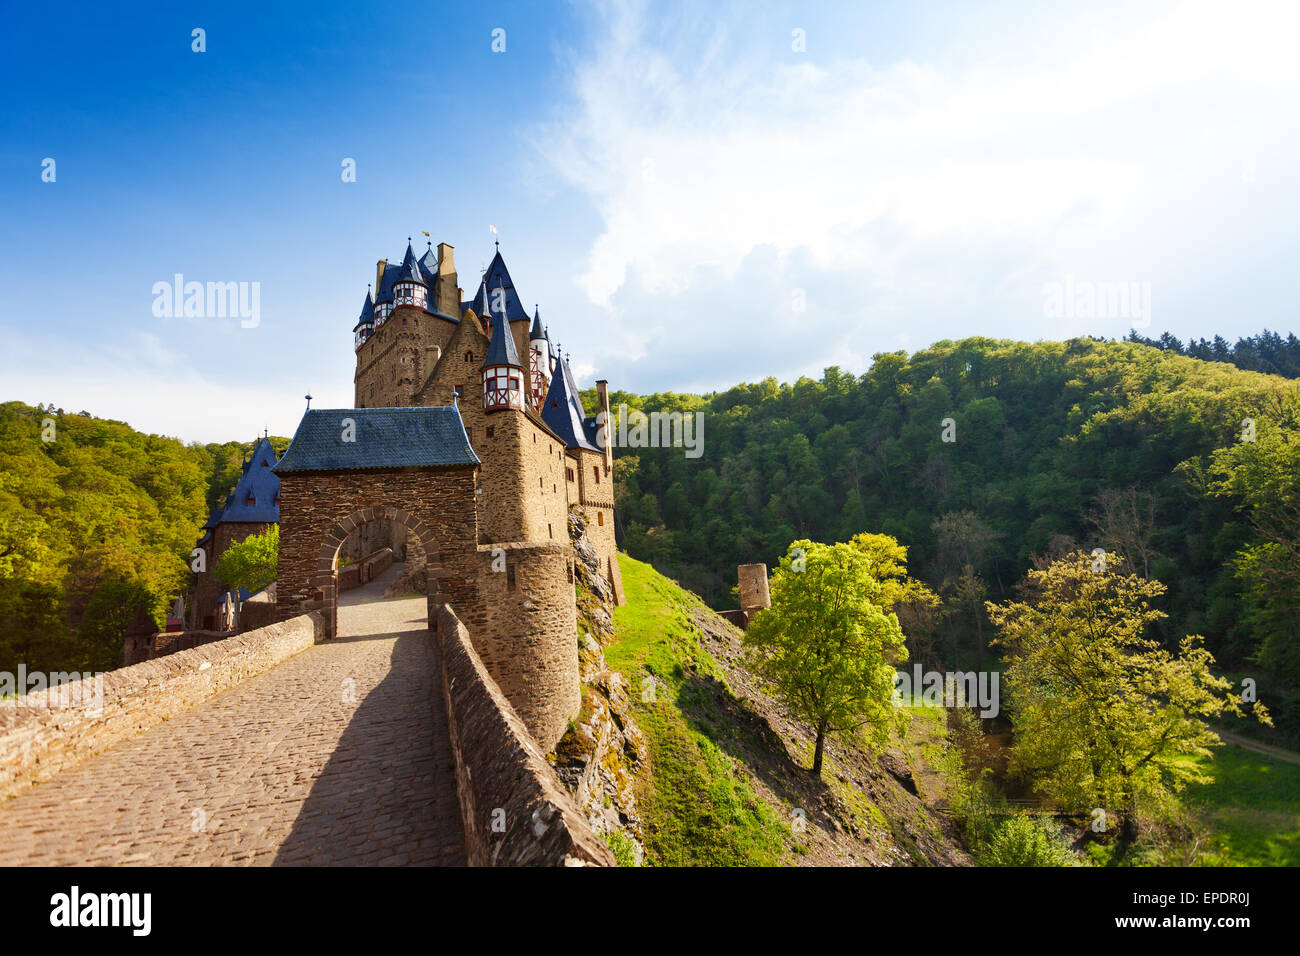 Page 3 Burg Eltz High Resolution Stock Photography And Images Alamy